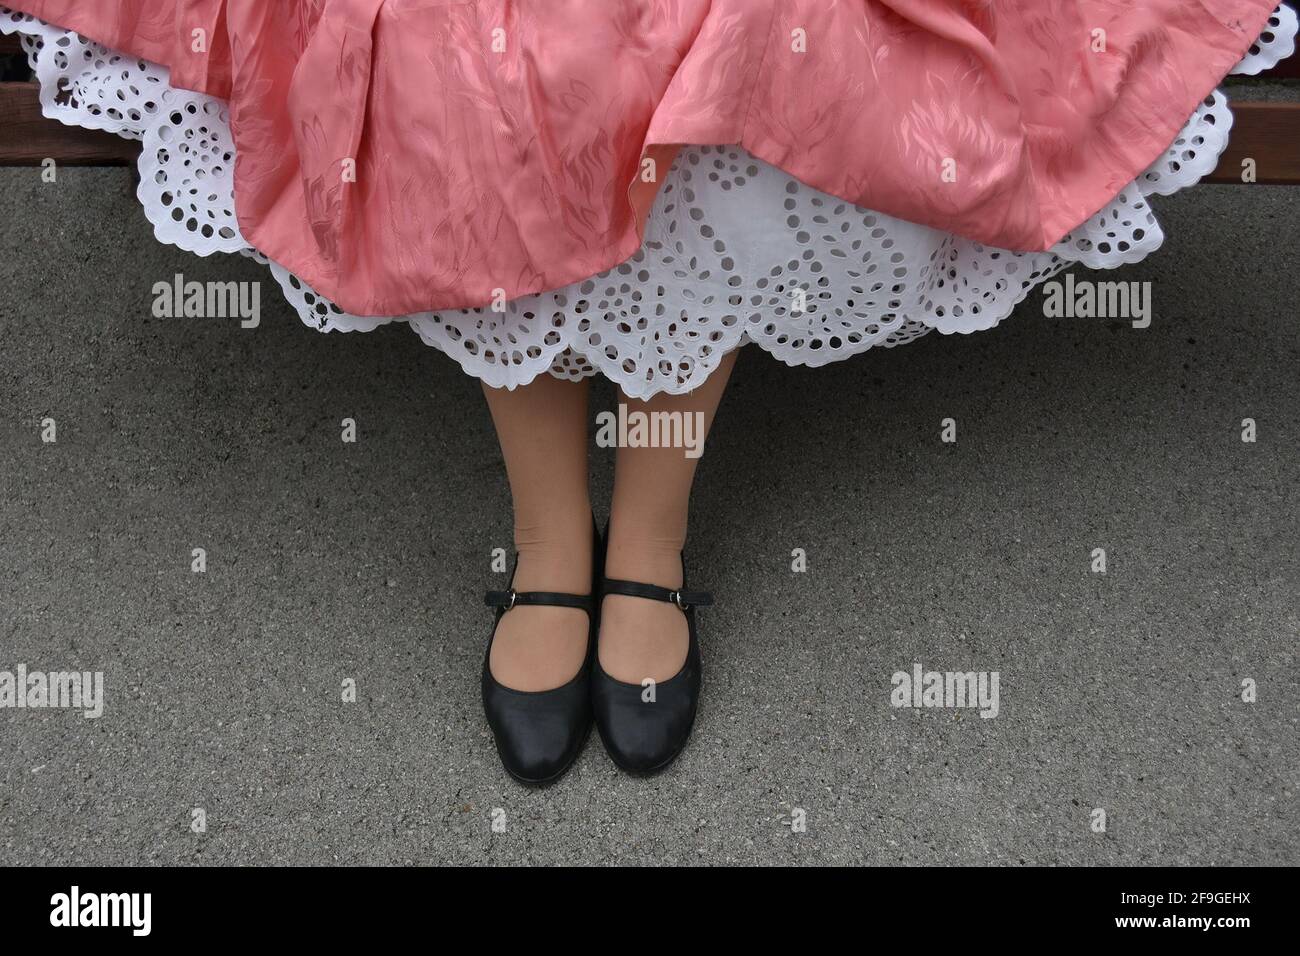 A closeup of a female wearing old petticoat hand-embroidered cotton under a pink dress Stock Photo